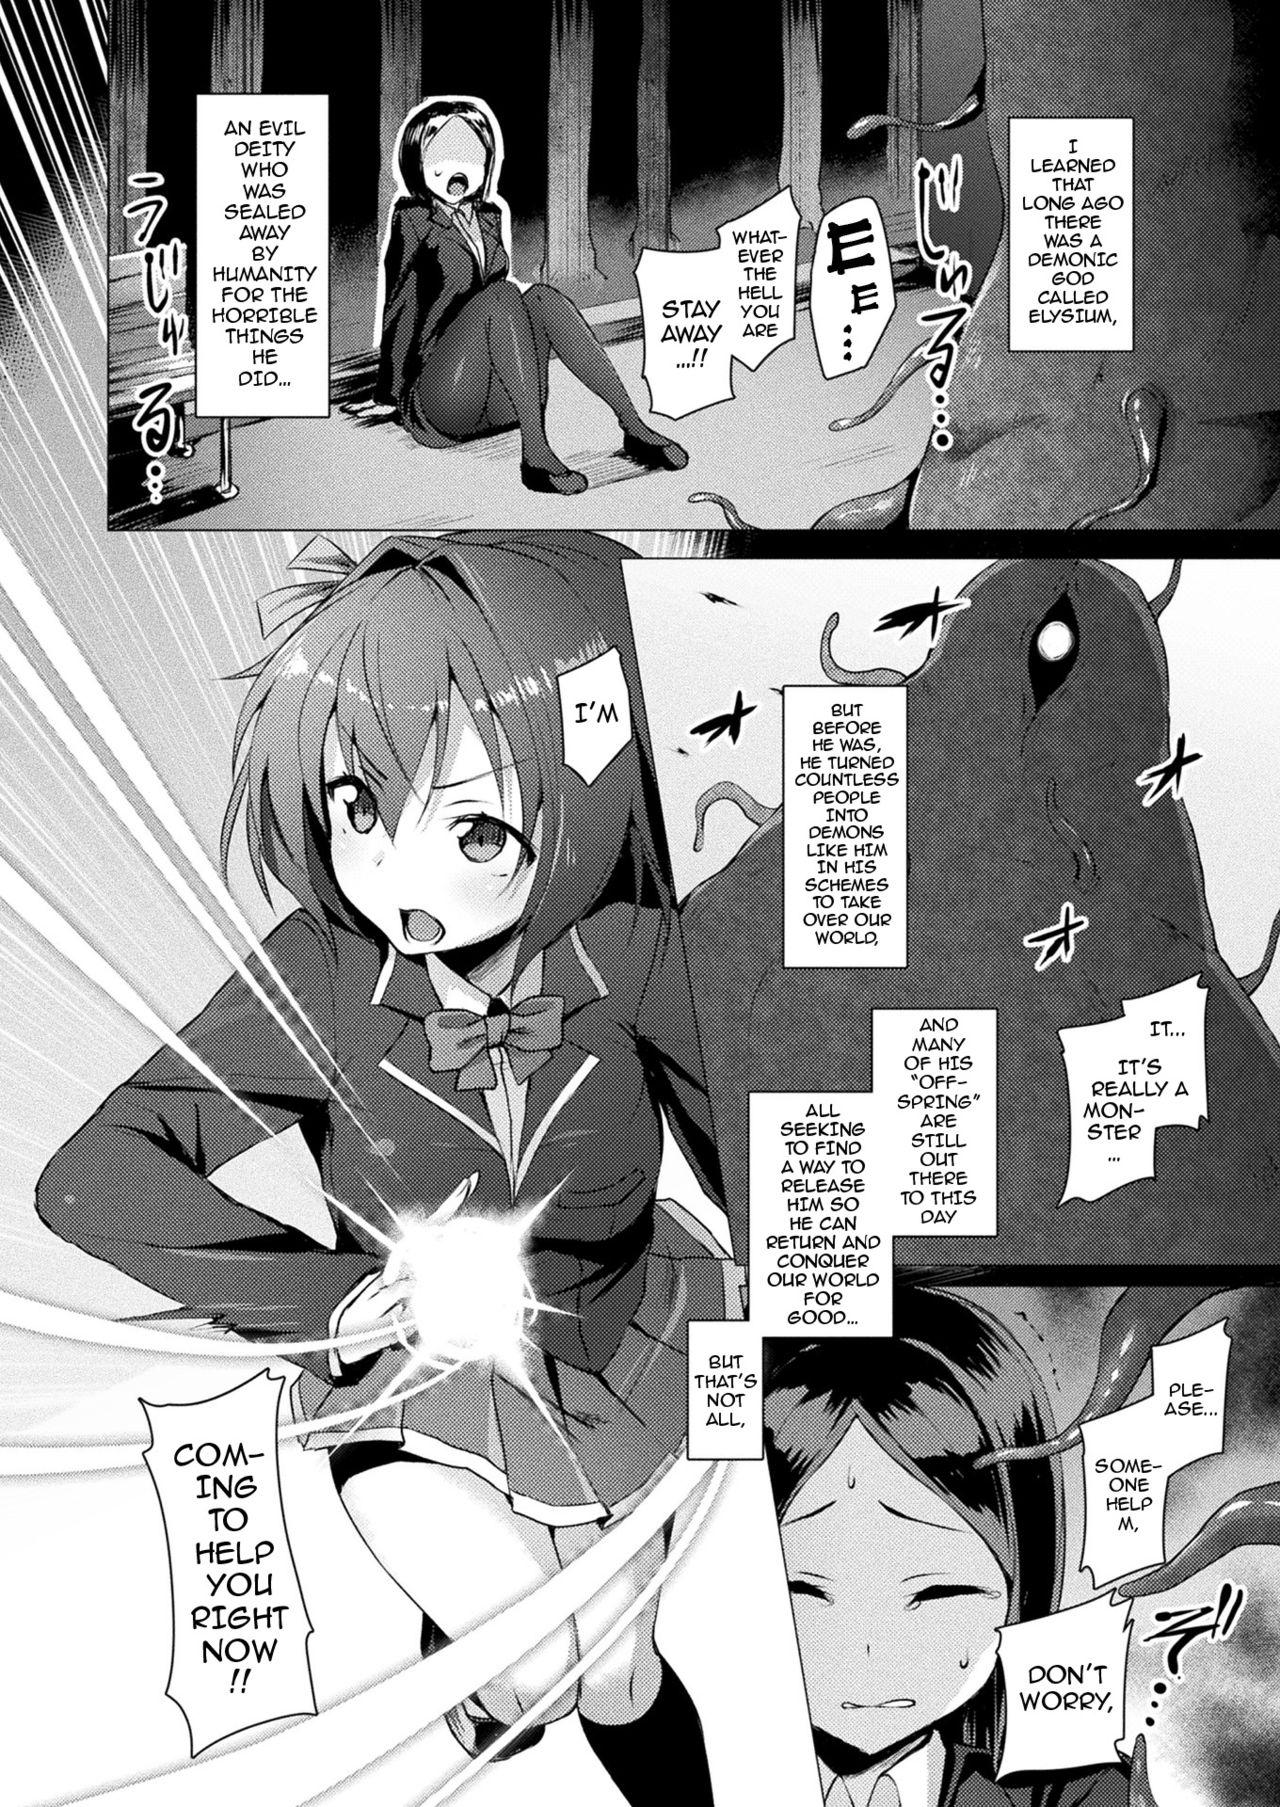 Spank Aisei Tenshi Love Mary | The Archangel of Love, Love Mary Ch 1-3 Tats - Page 3